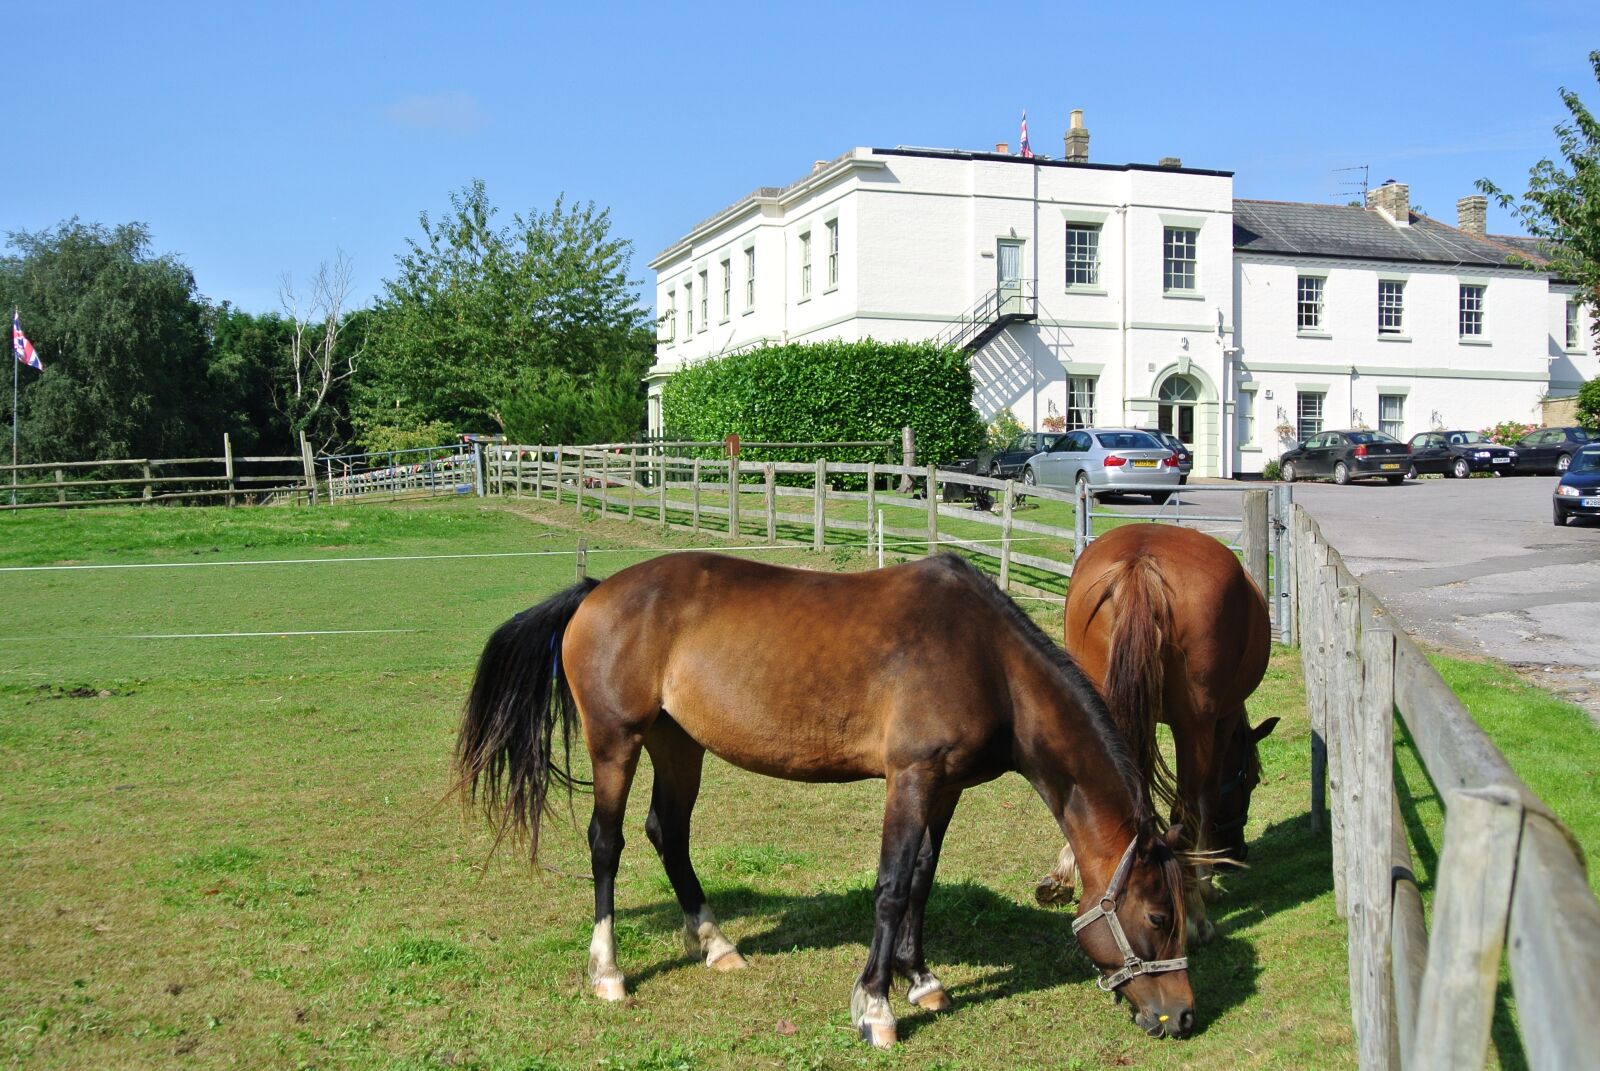 Nikon 1 J1 sample photo. Country house, horses, country photography